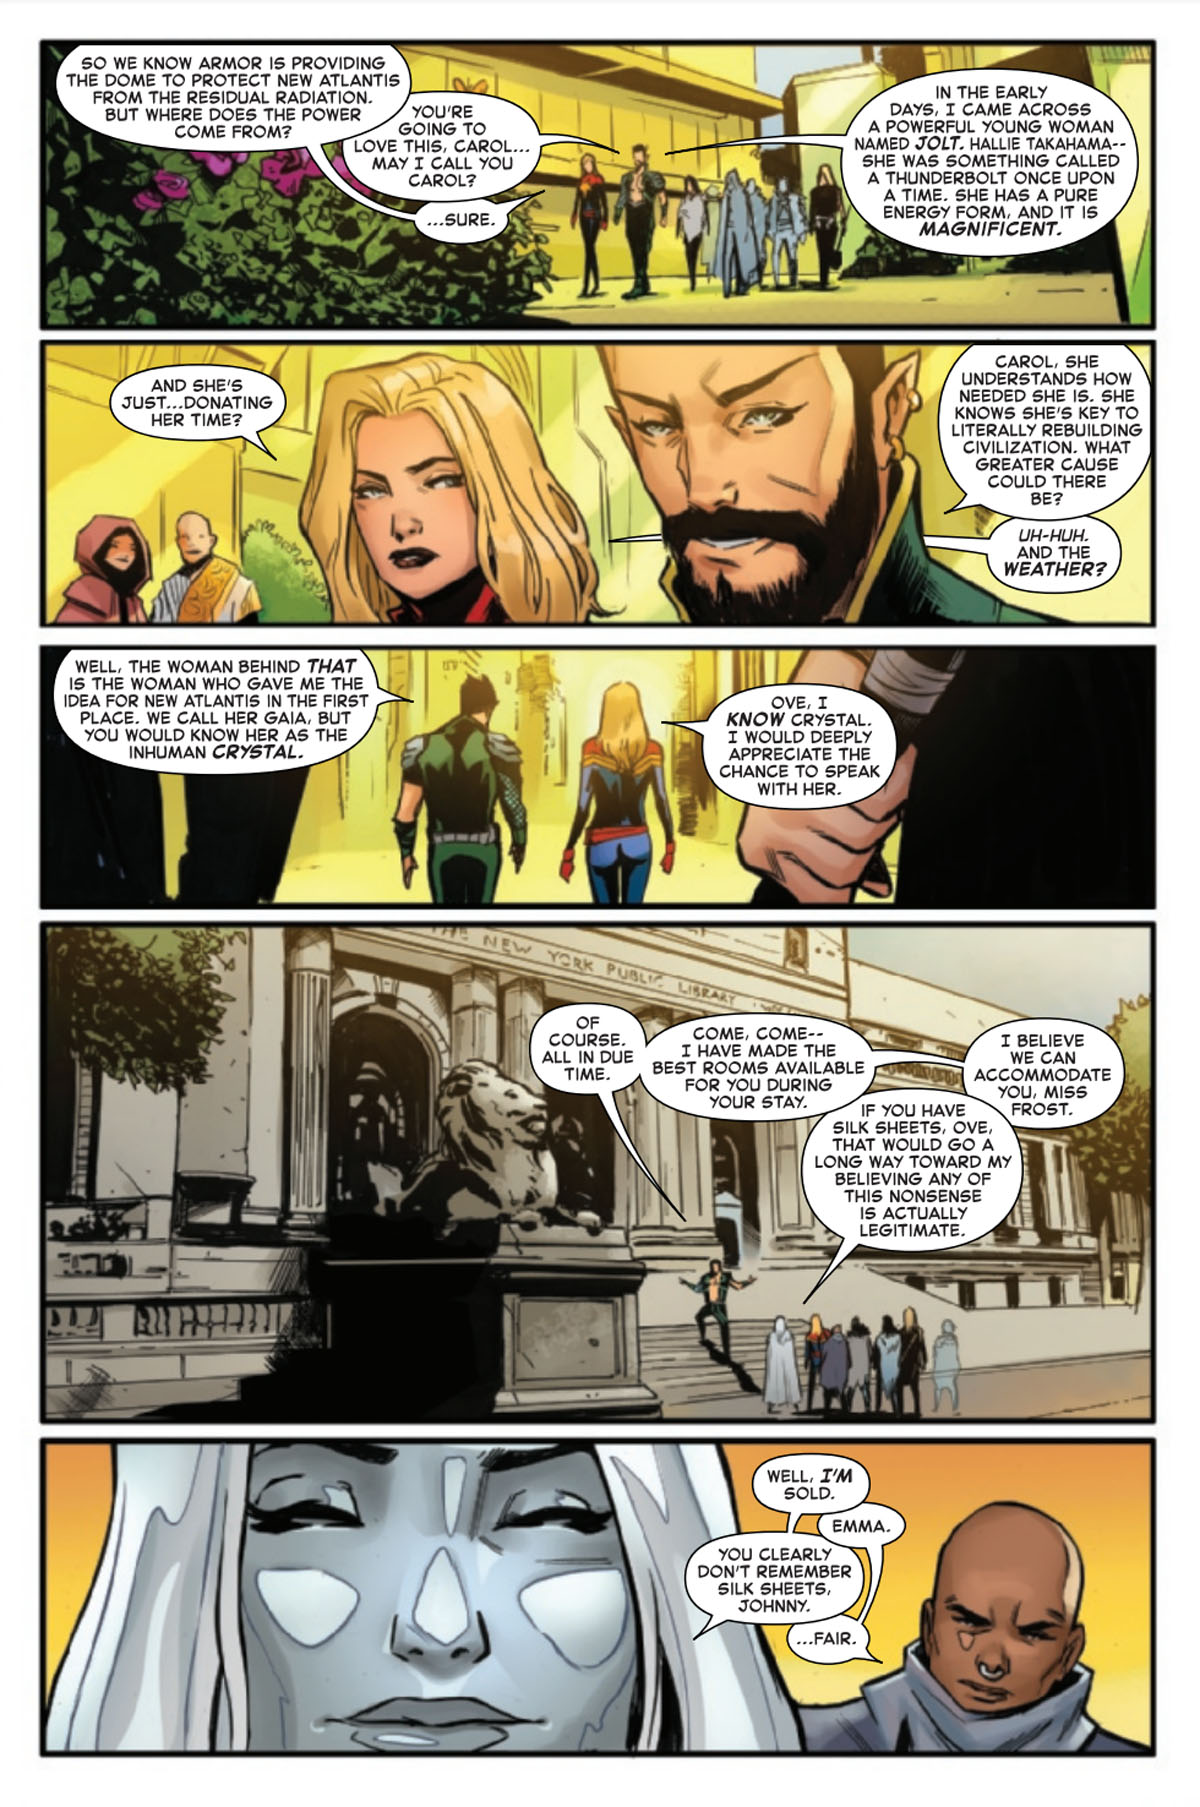 Captain Marvel #24 page 3